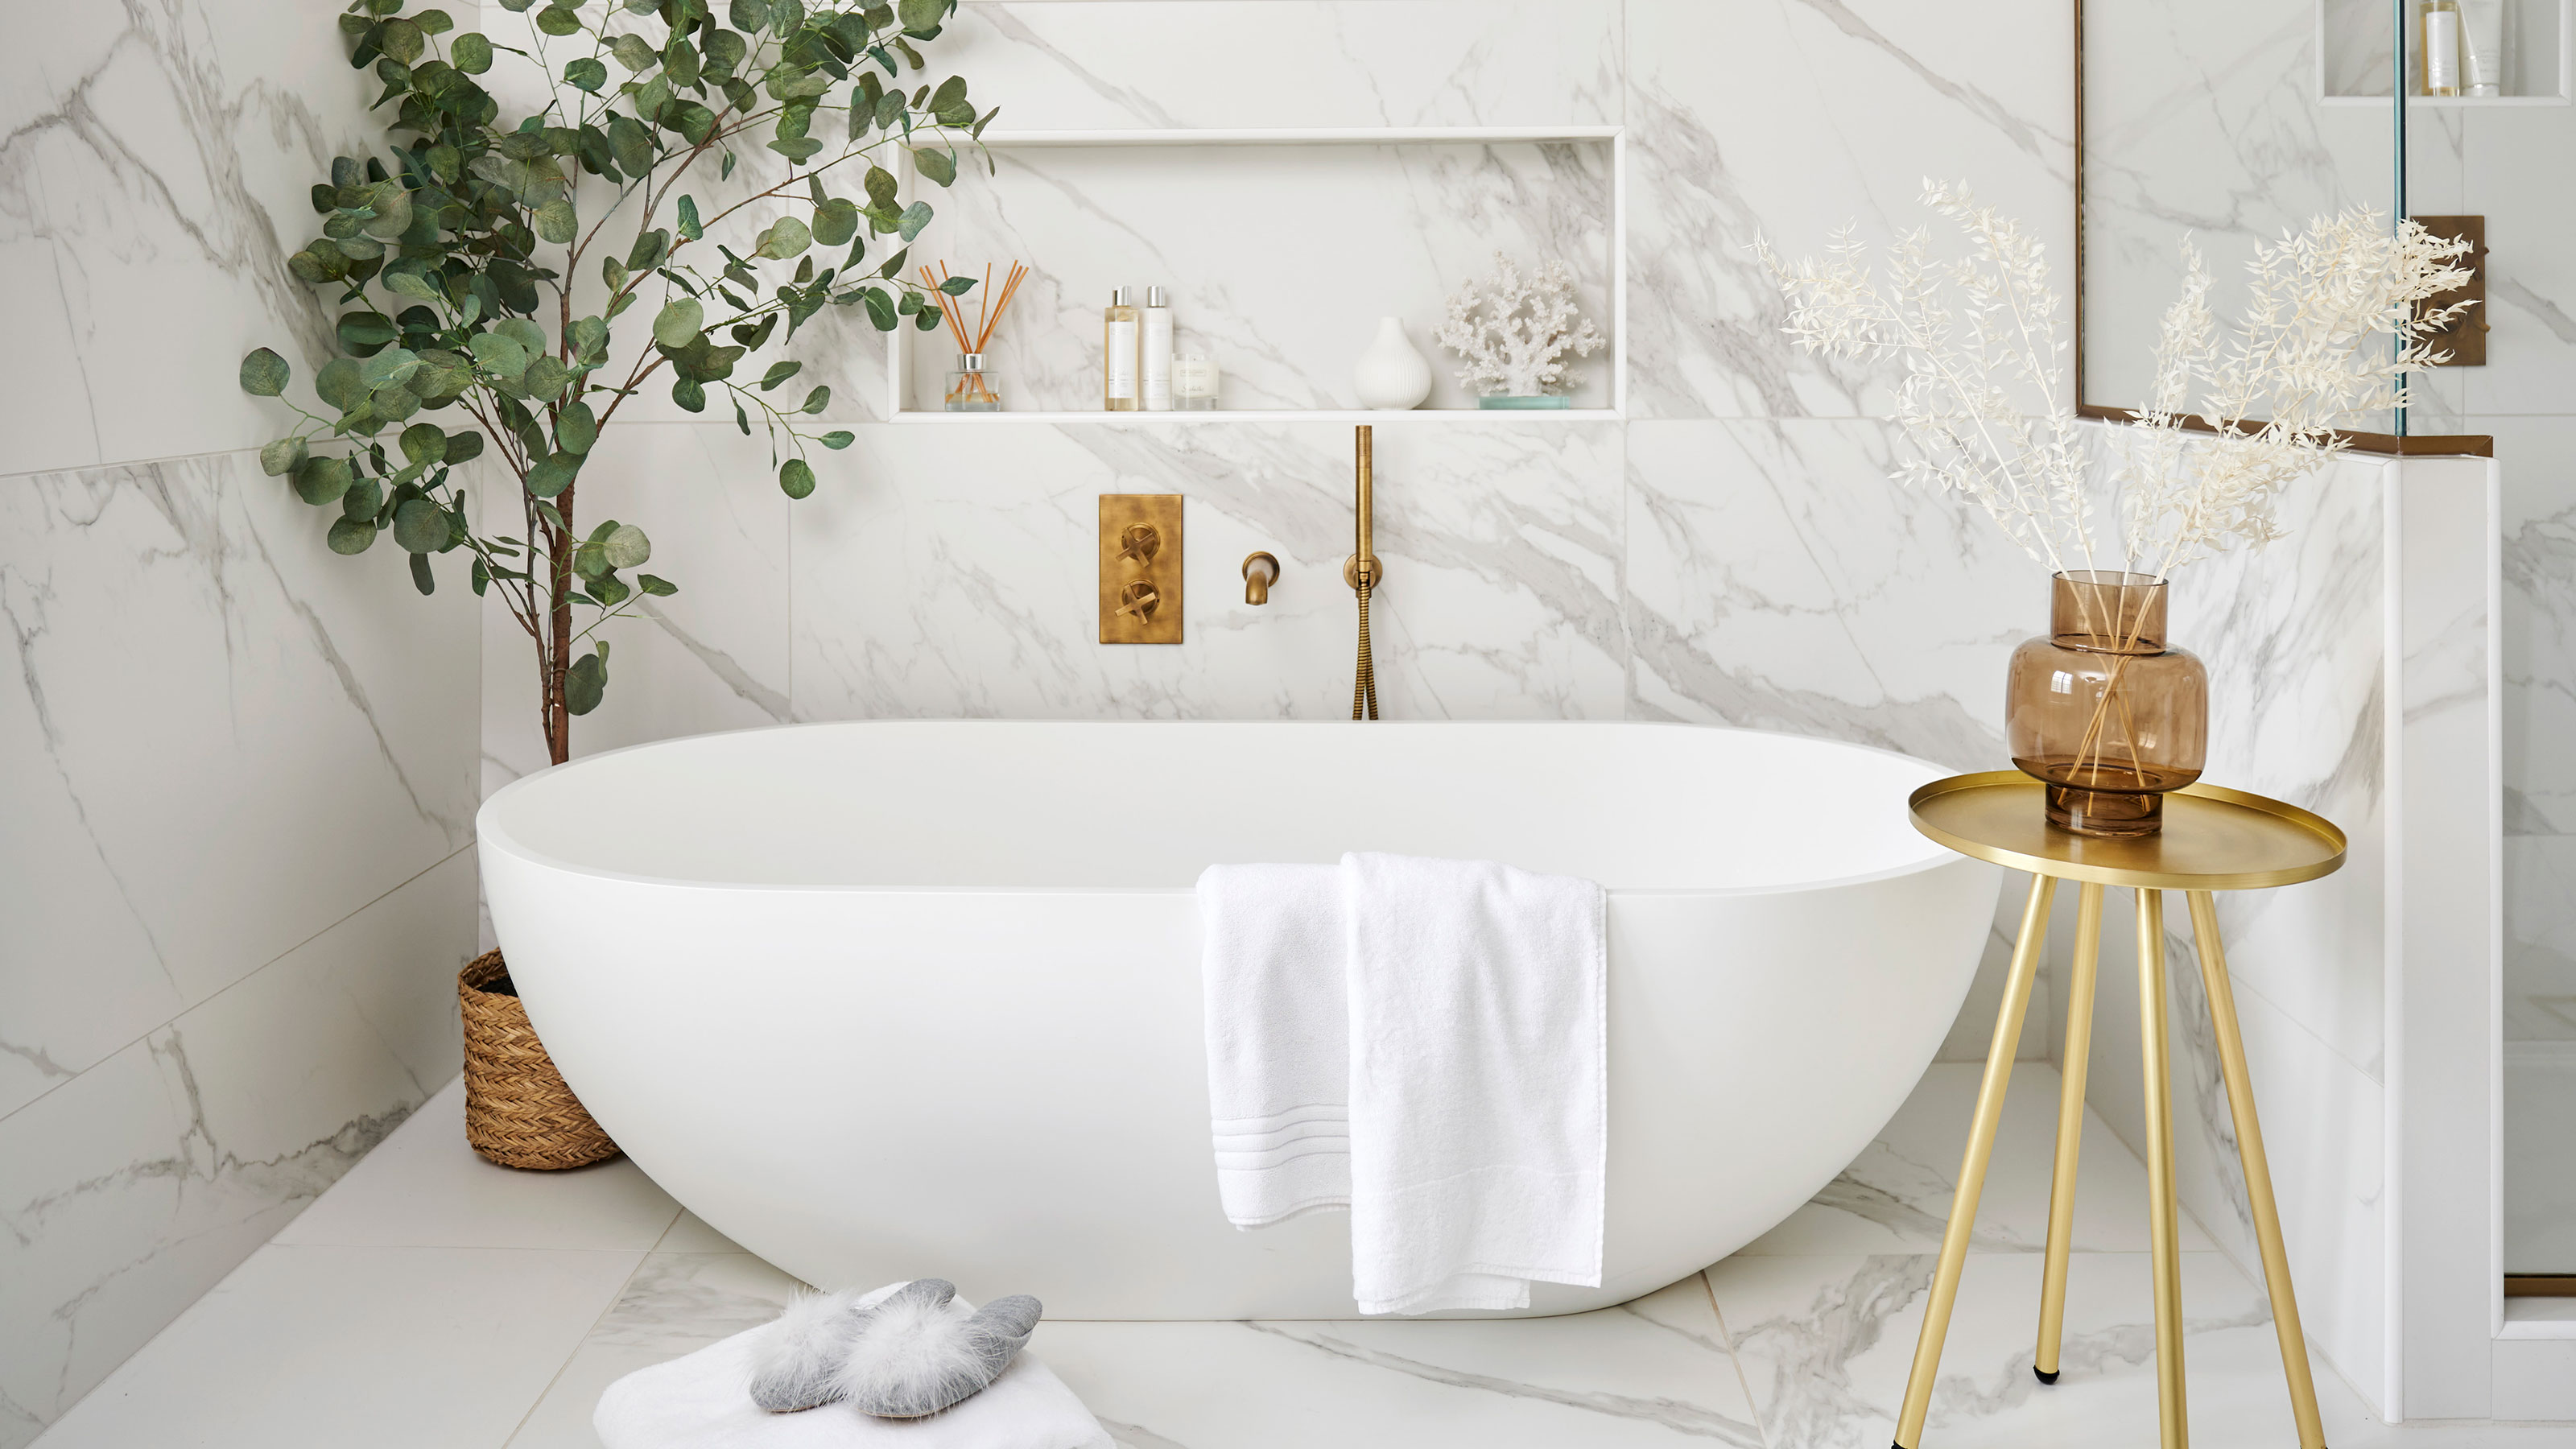 Take the Spa Home With These Simple Spa Bathroom Ideas